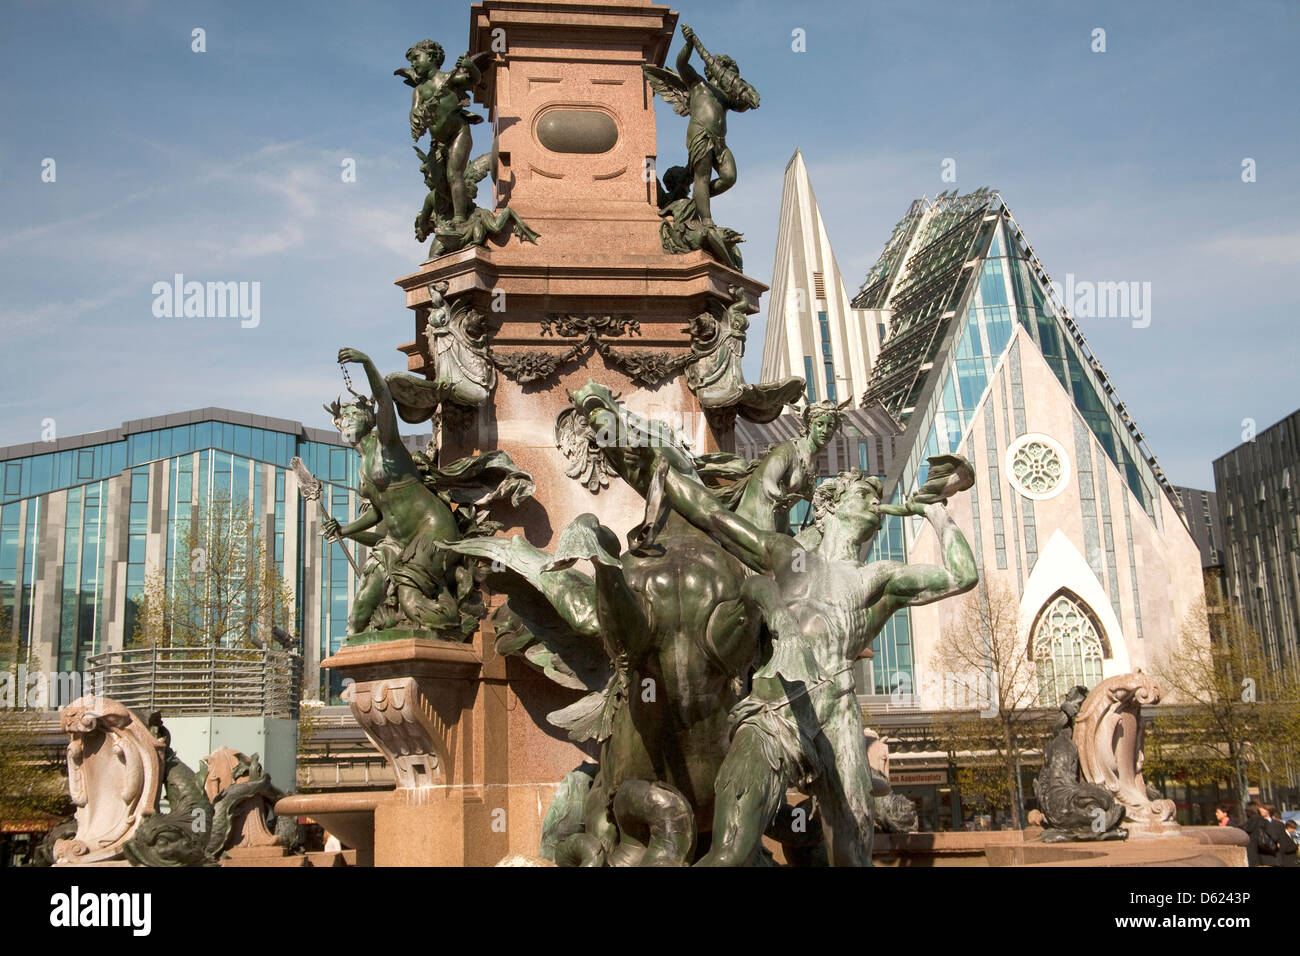 Detail of monument in center of Augustus Plaza, center of Leipzig. Glass facade of new Leipzig University in background. Stock Photo